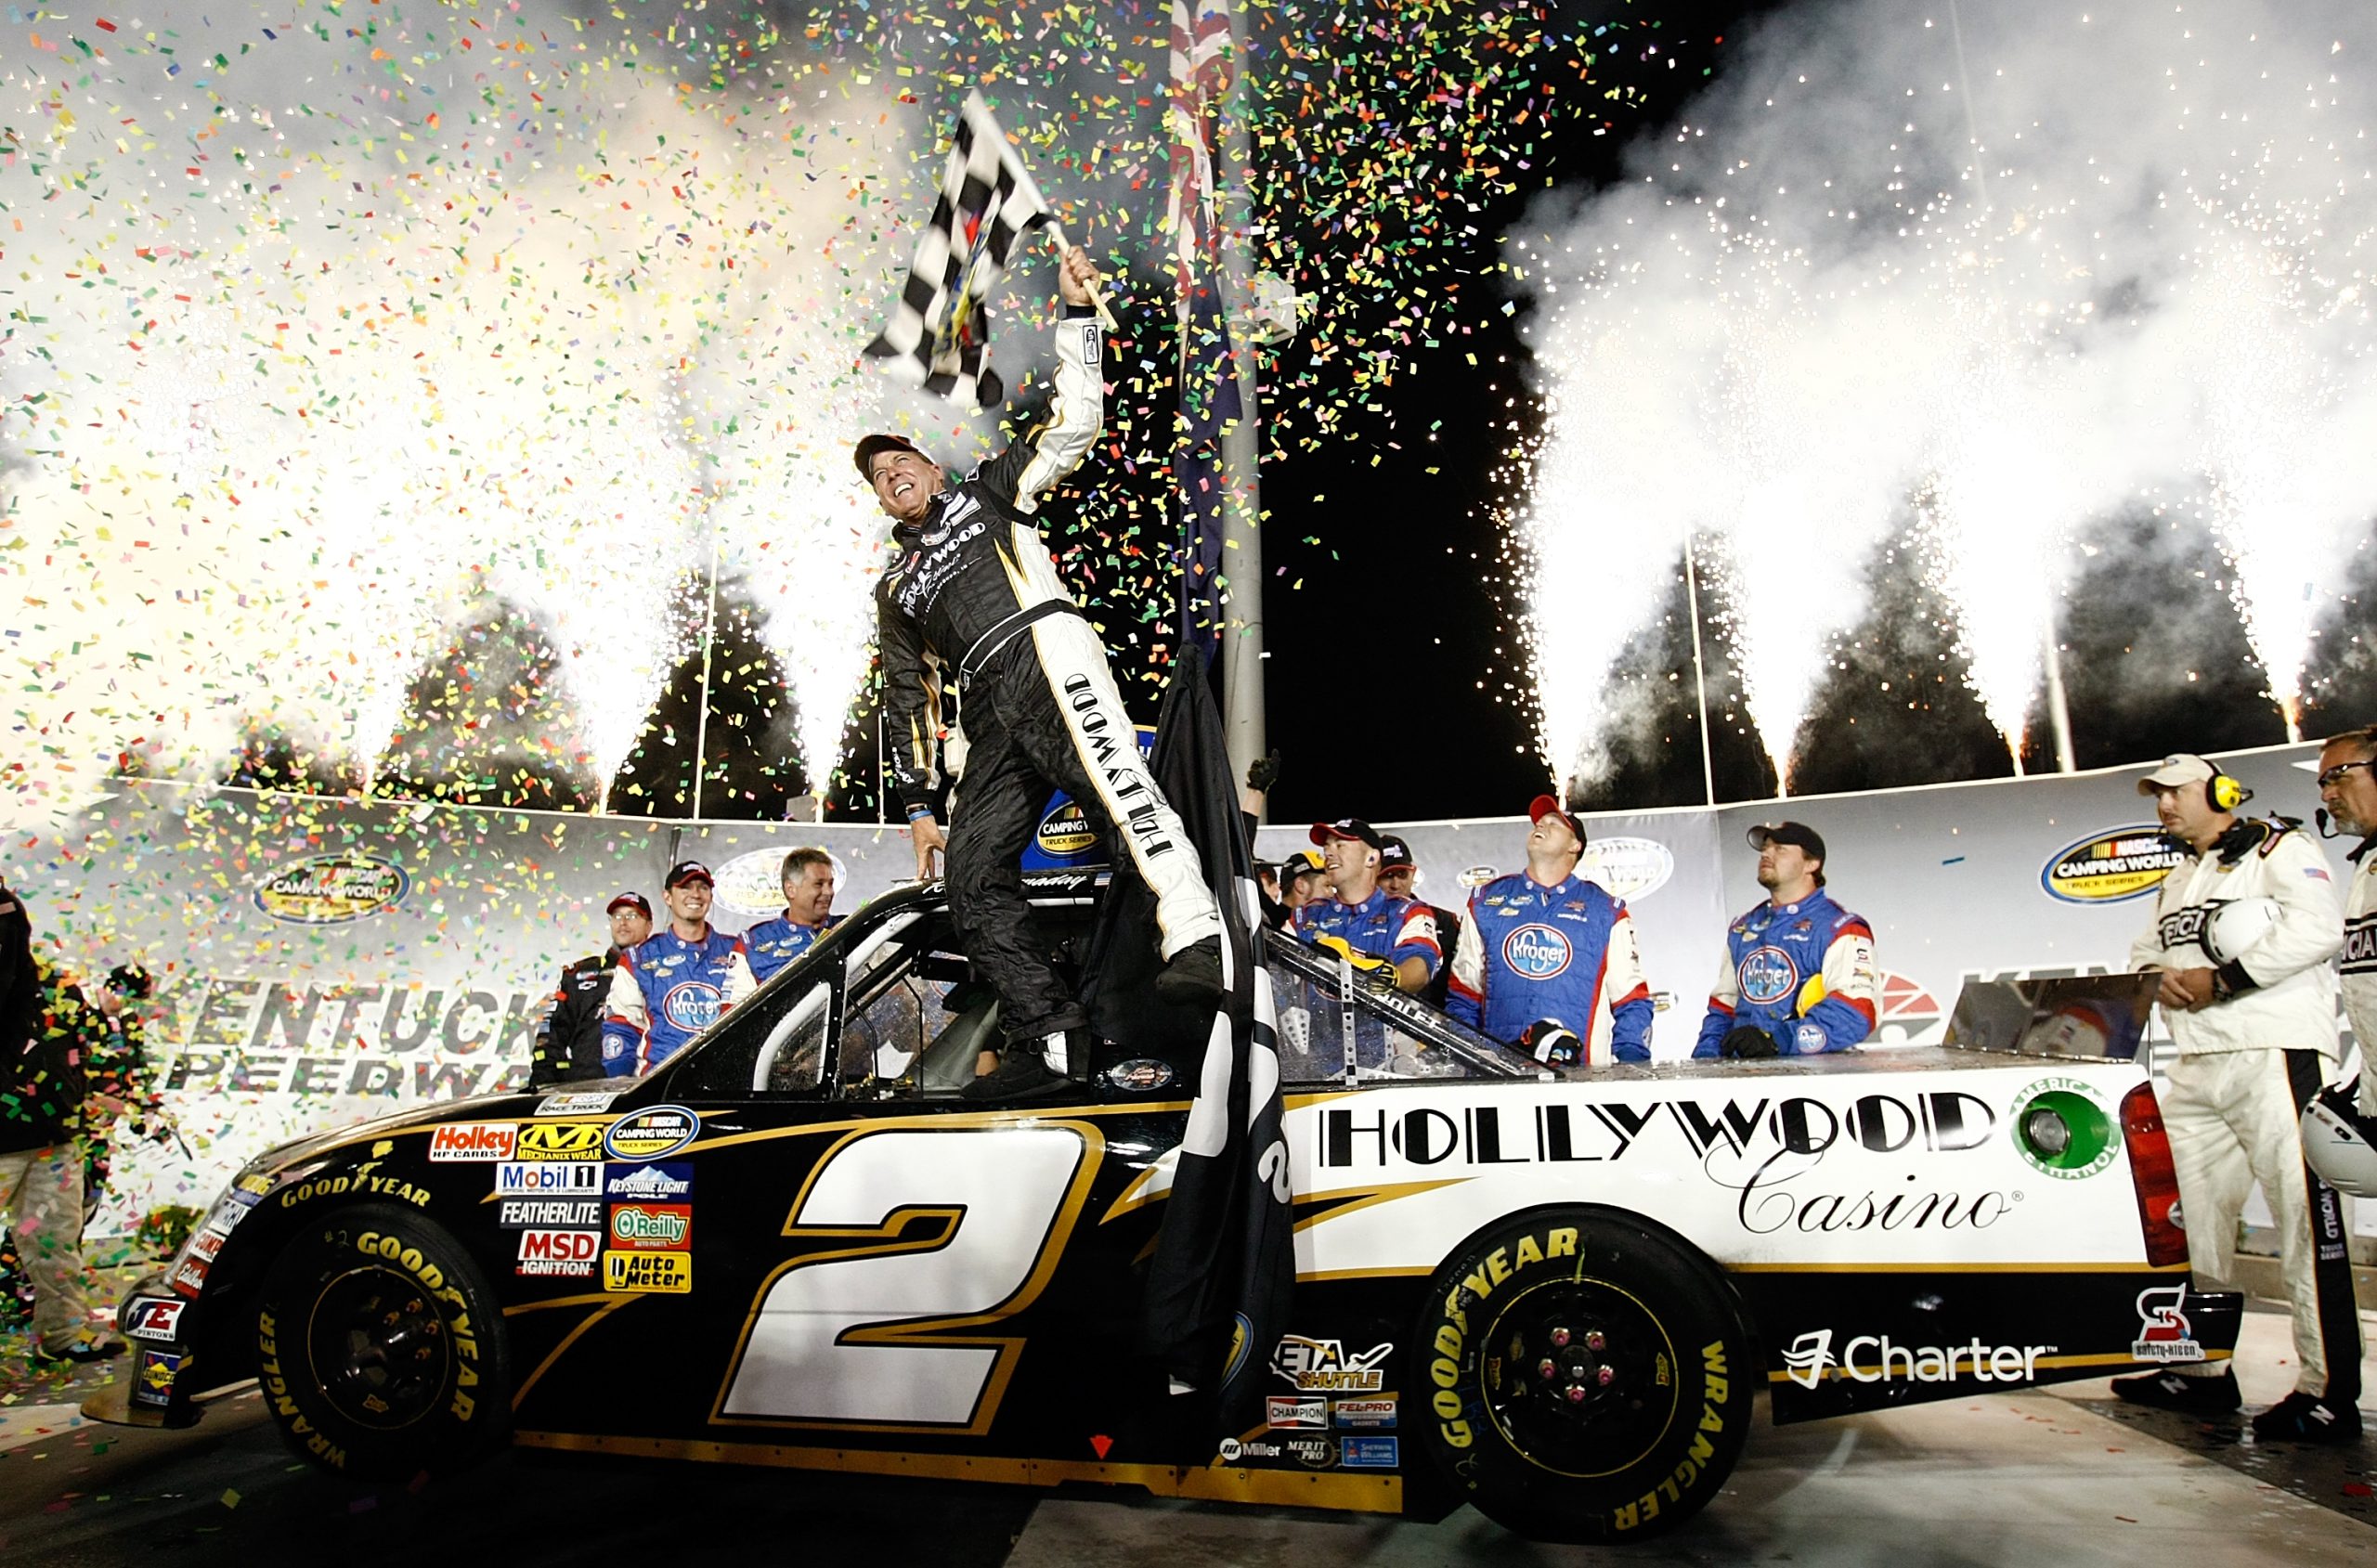 SPARTA, KY - OCTOBER 01: Ron Hornaday Jr. driver of the #2 Hollywood Casino Chevrolet celebrates winning his 50th race after the NASCAR Camping World Truck Series Kentucky 225 on October 1, 2011 at Kentucky Speedway in Sparta, Kentucky. (Photo by Jonathan Ferrey/Getty Images for NASCAR)